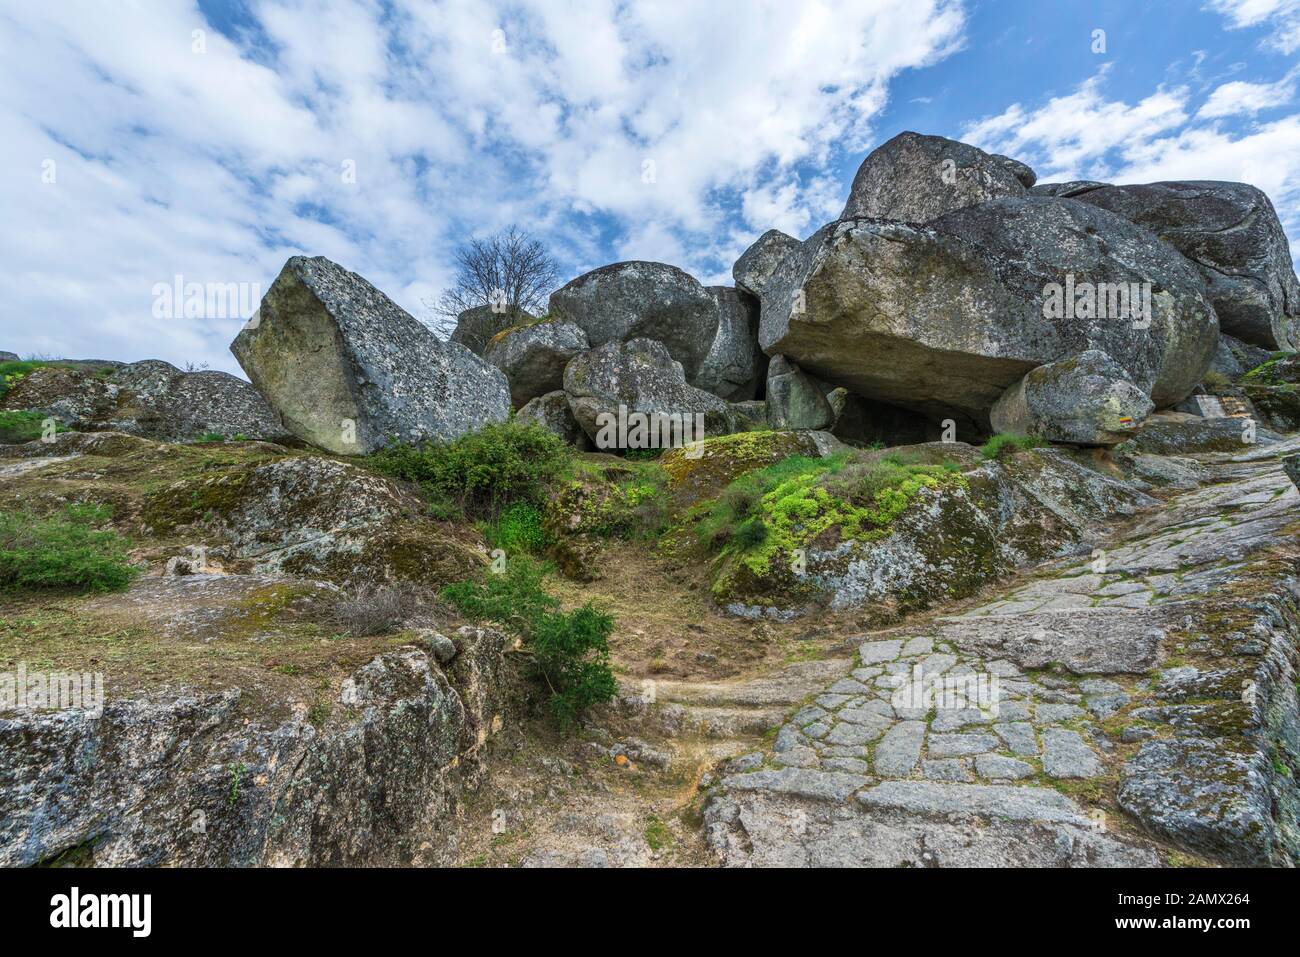 Scenic rocks at the outskirts of Monsanto village, Portugal Stock Photo